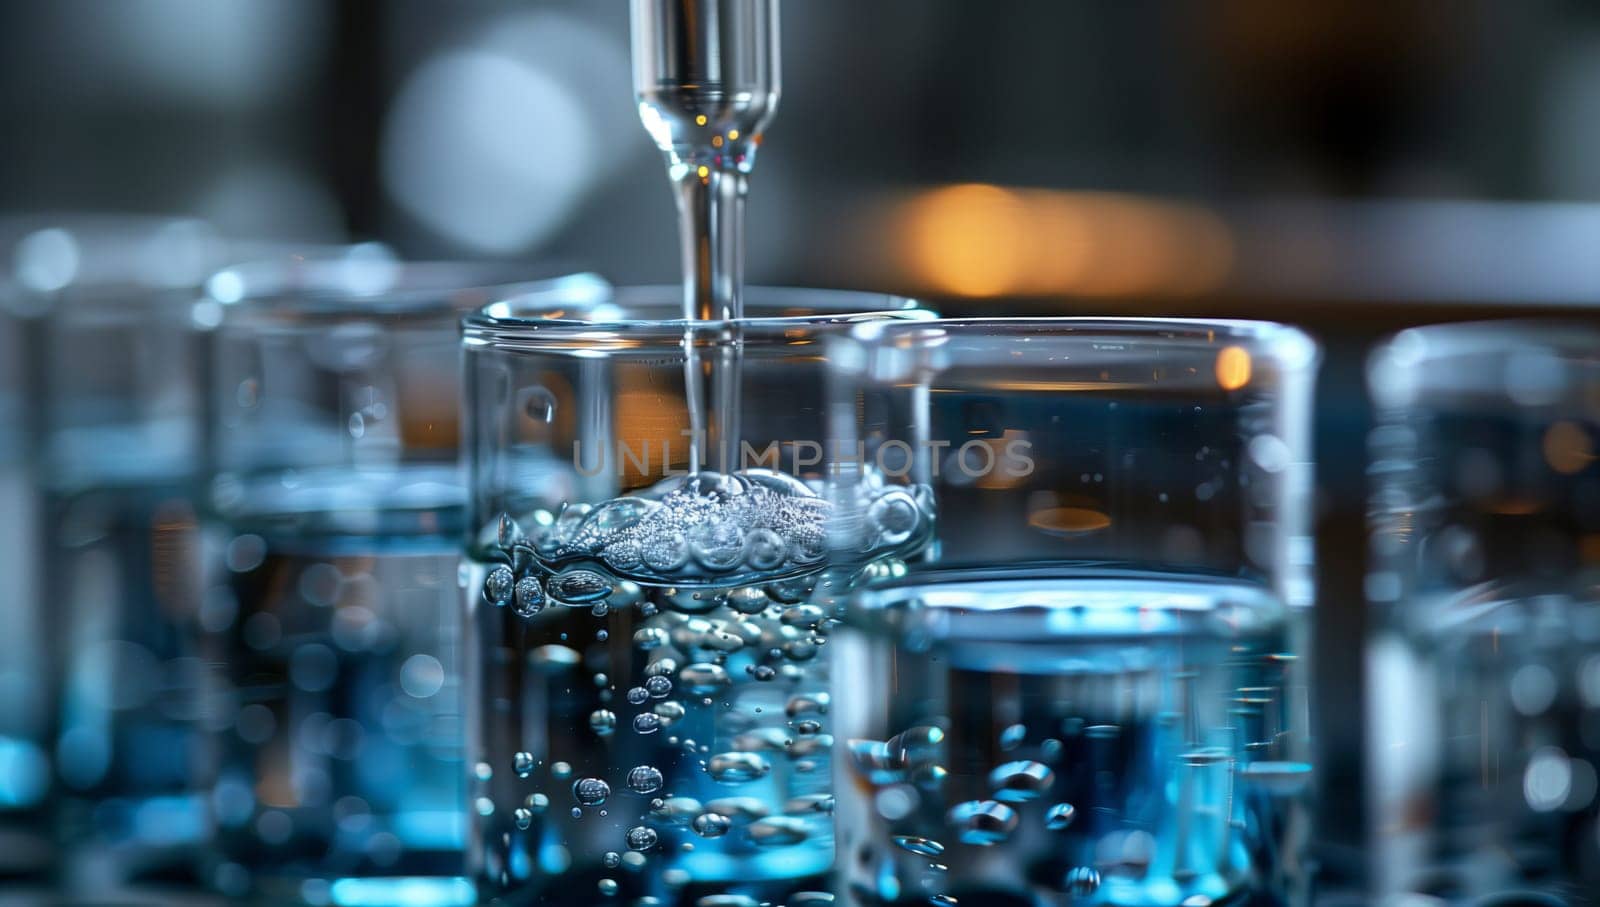 Liquid water is being poured into a glass containing bubbles, creating a mixture of fluid and gas inside the drinkware. This scientific process involves the interaction of water and air in the glass